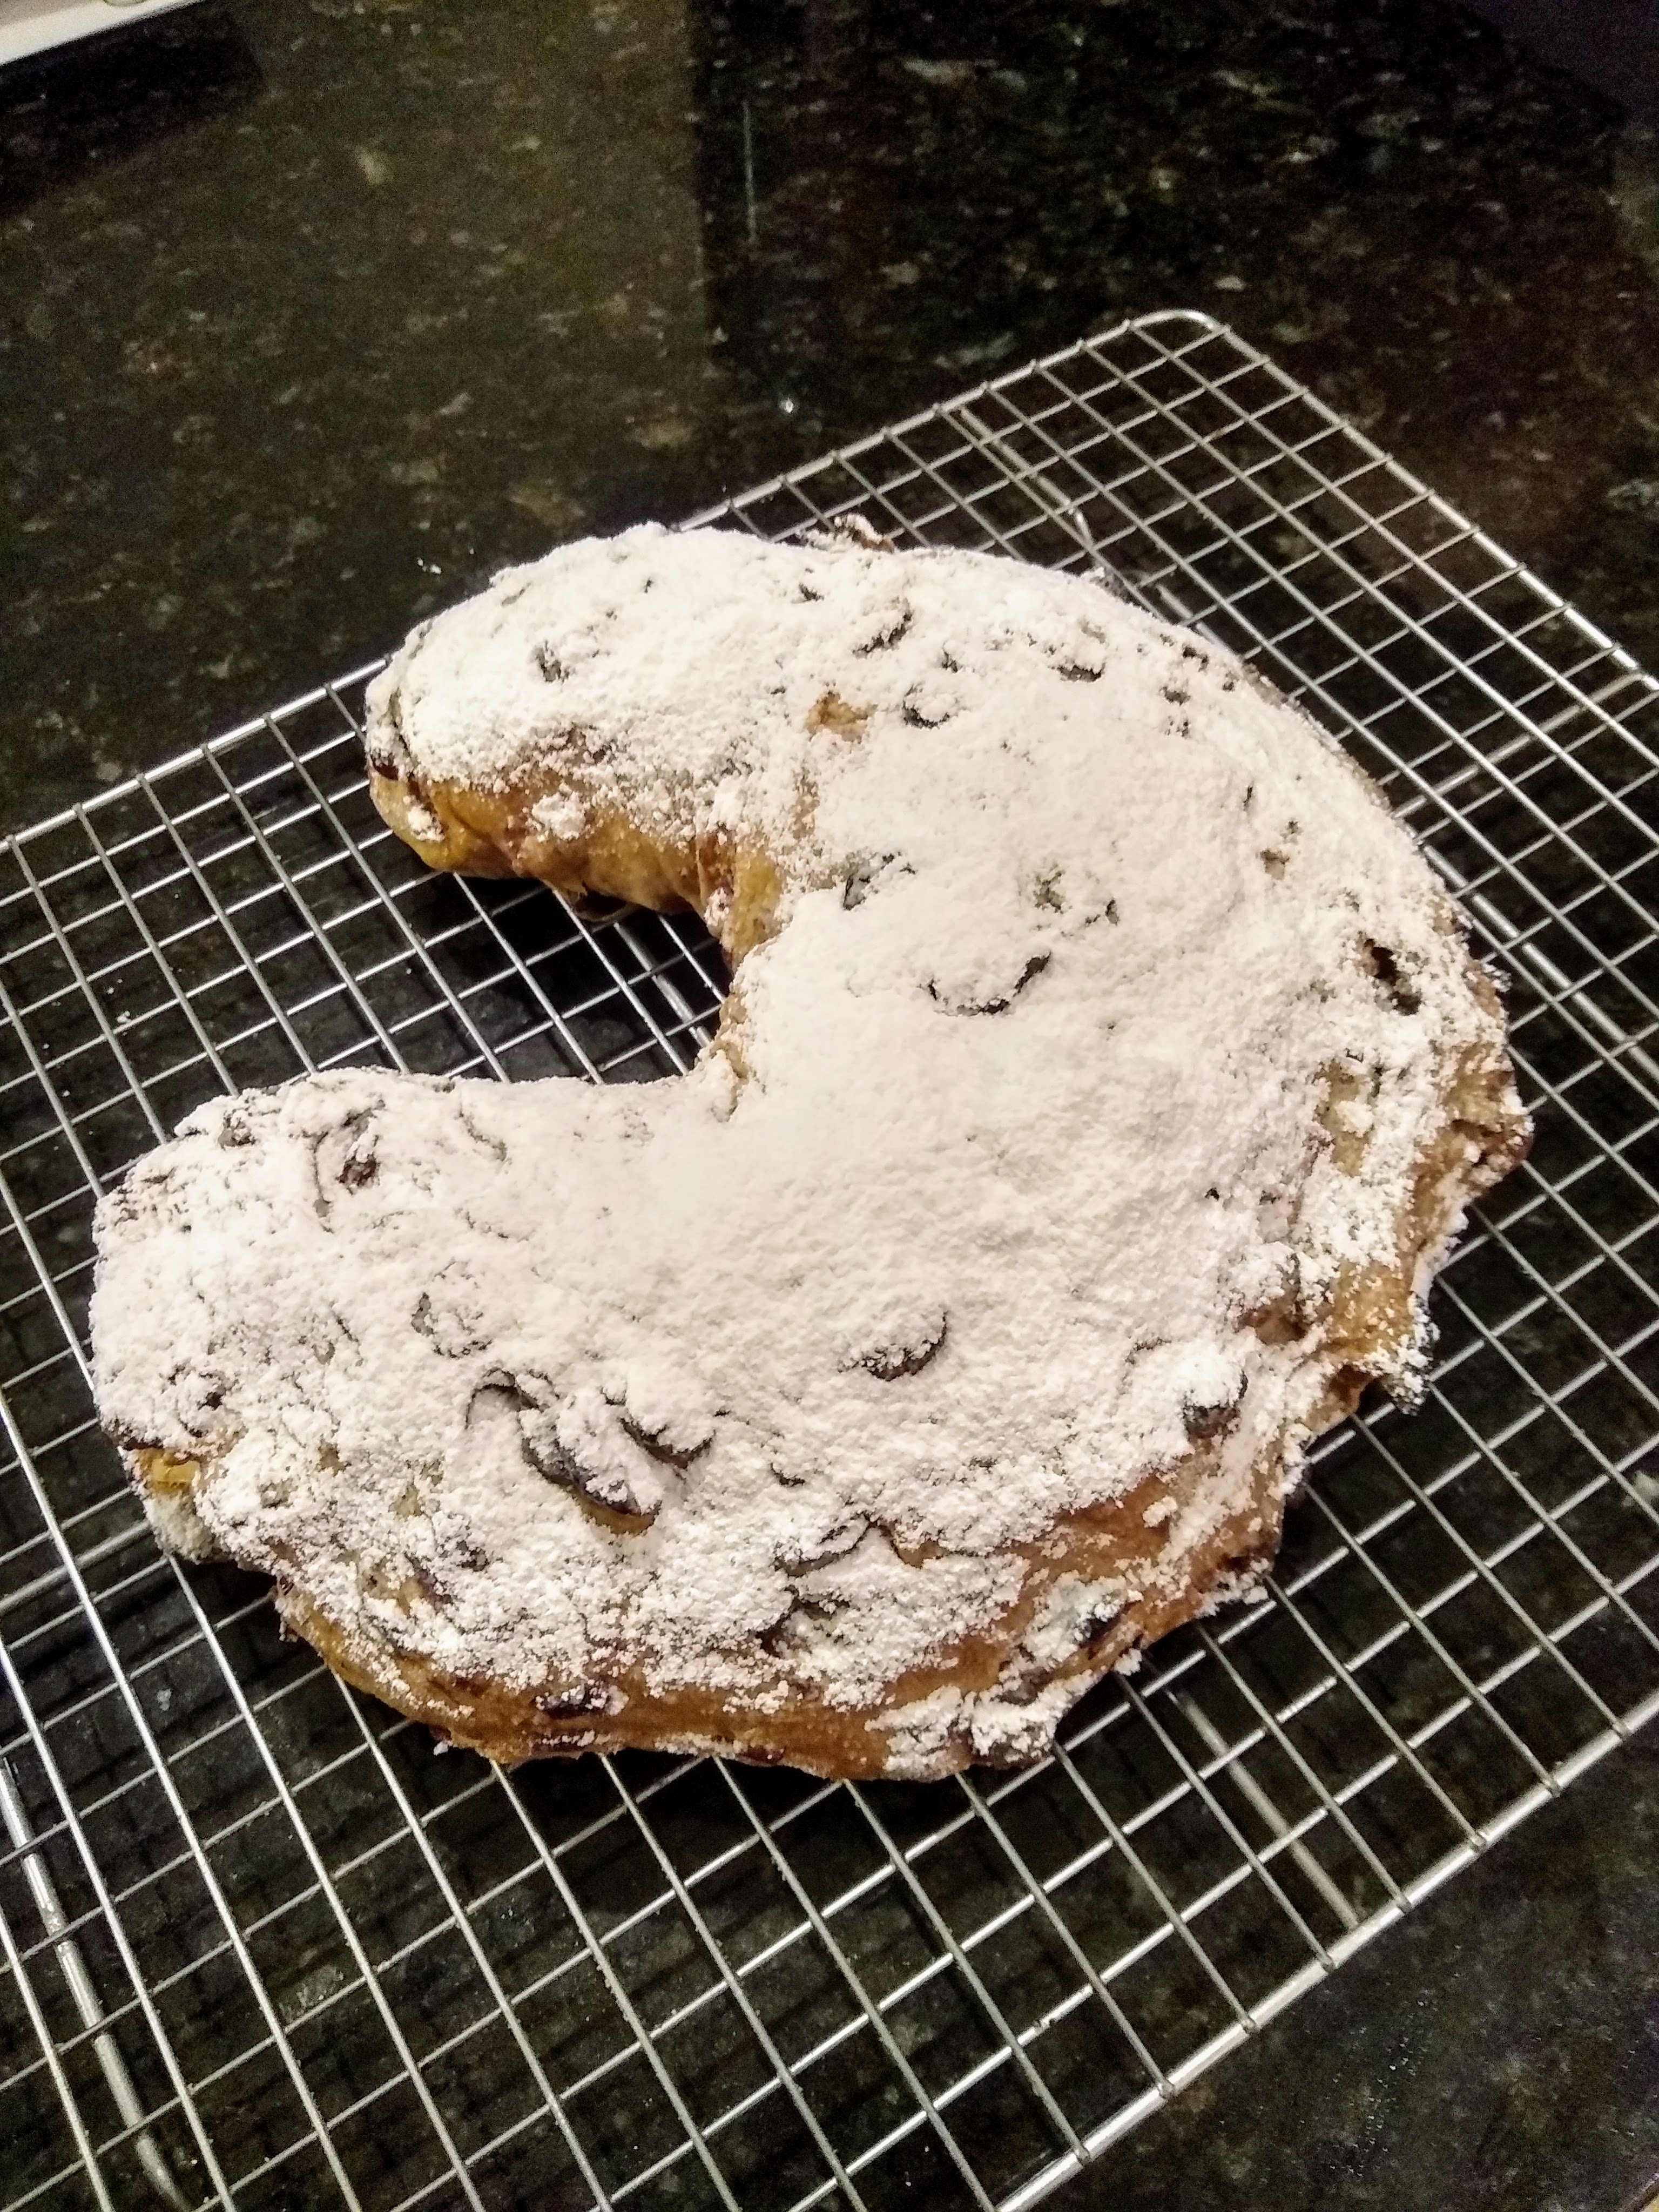 Completed stollen, dusted in powdered sugar